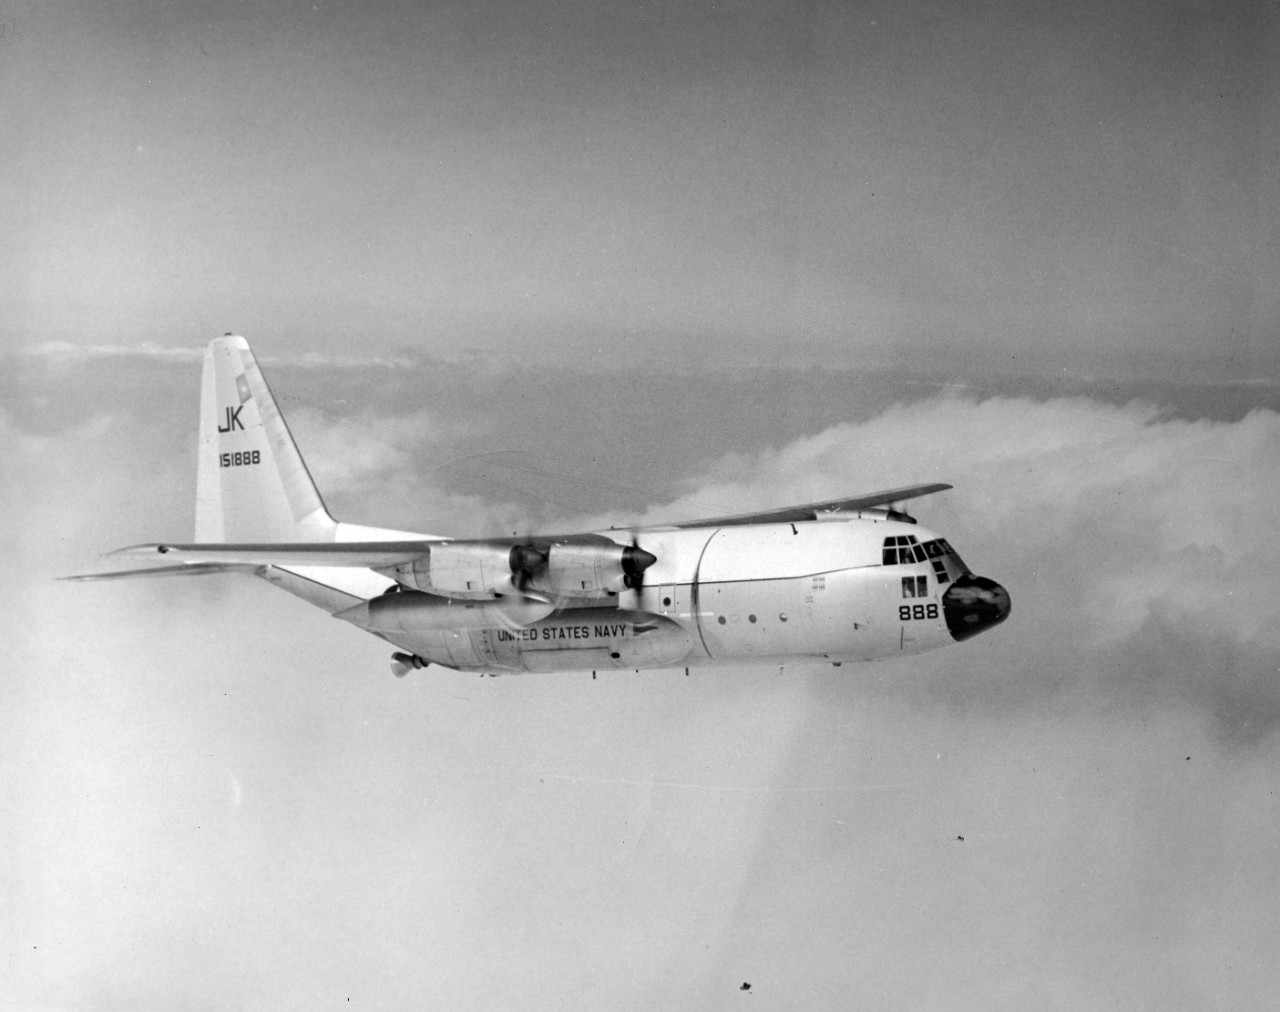 Naval Air Station, Patuxent River, MD - an airborne C-130 Hercules Transport Aircraft. April 16, 1967. 